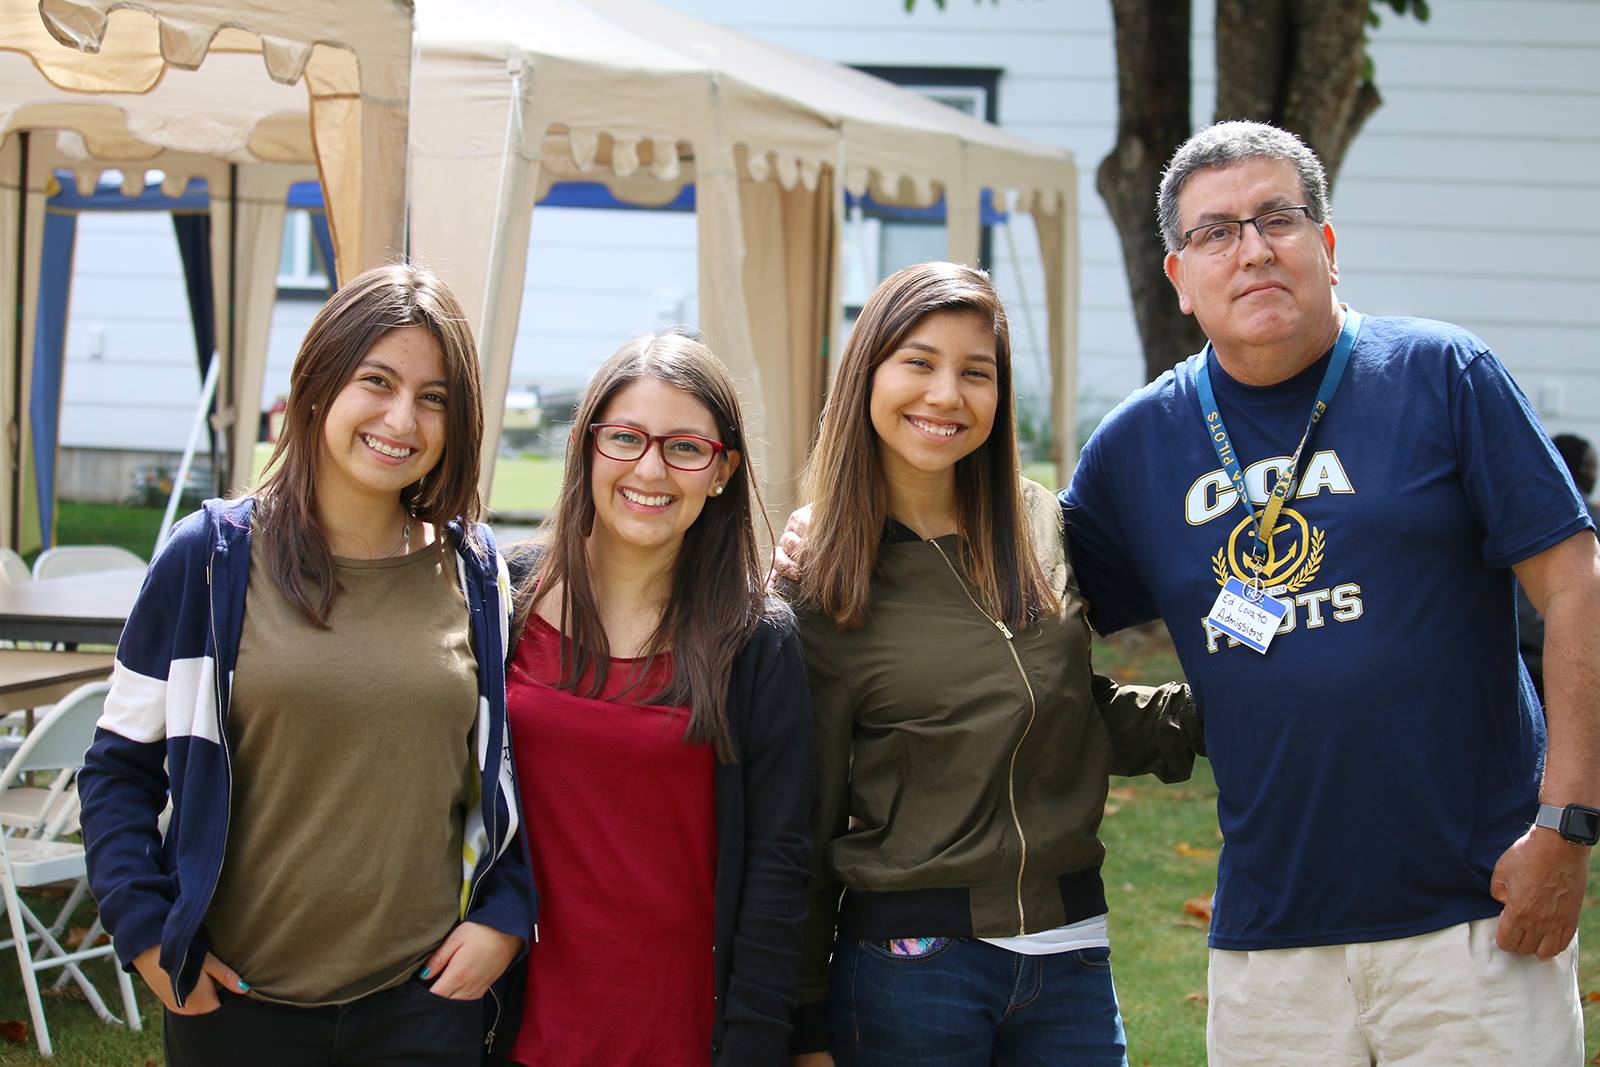 admissions director, Ed Lovato posing with Columbian students